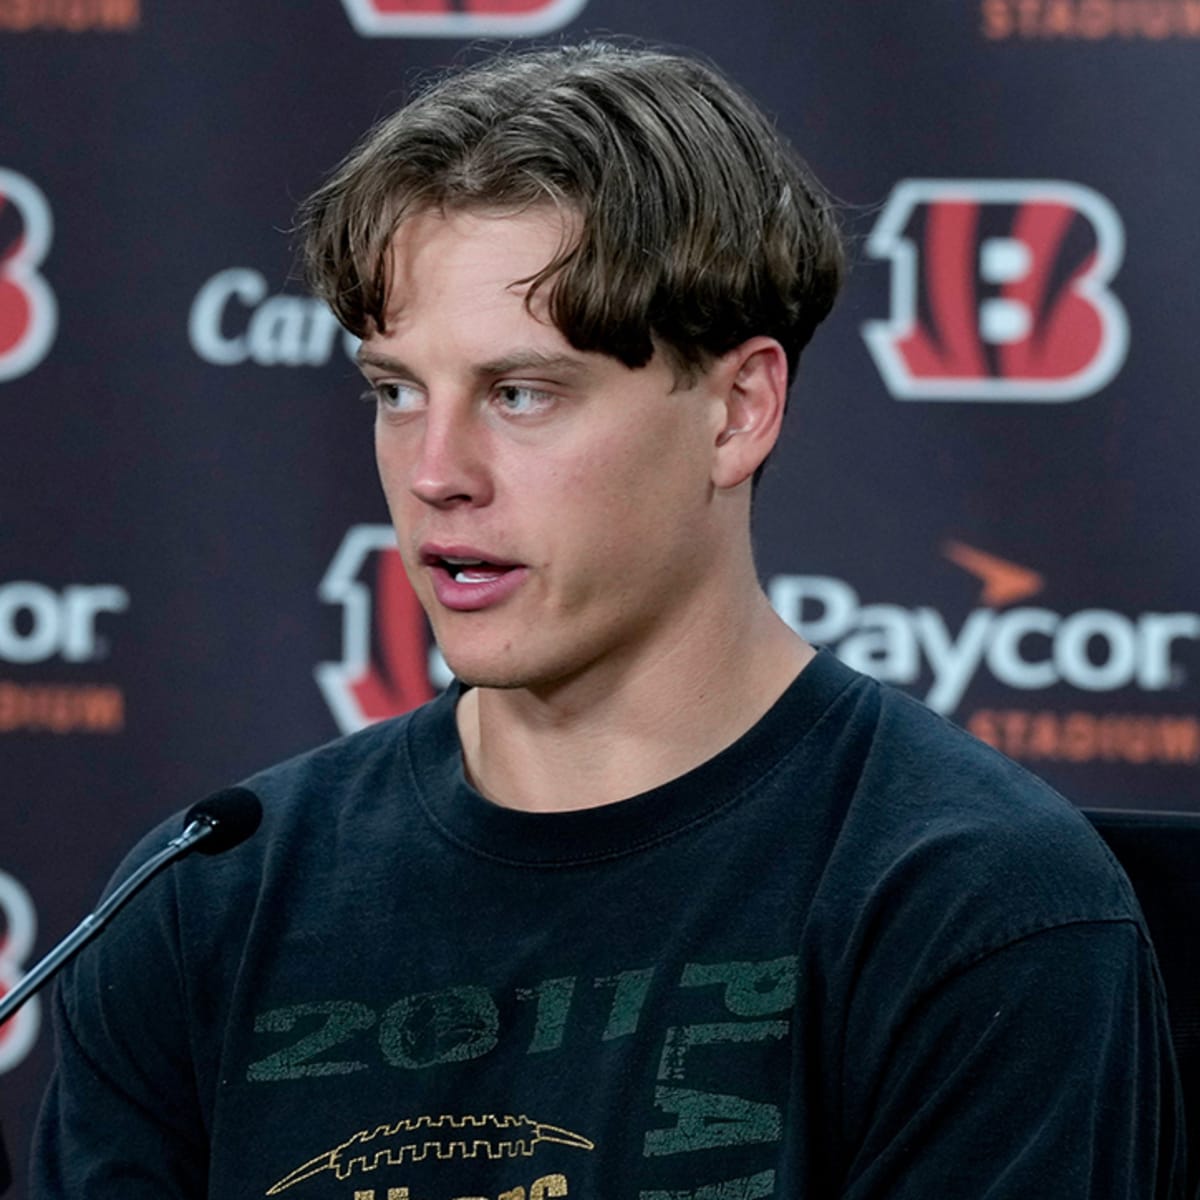 Joe Burrow Cuts His Hair After Bengals' Disappointing First Game